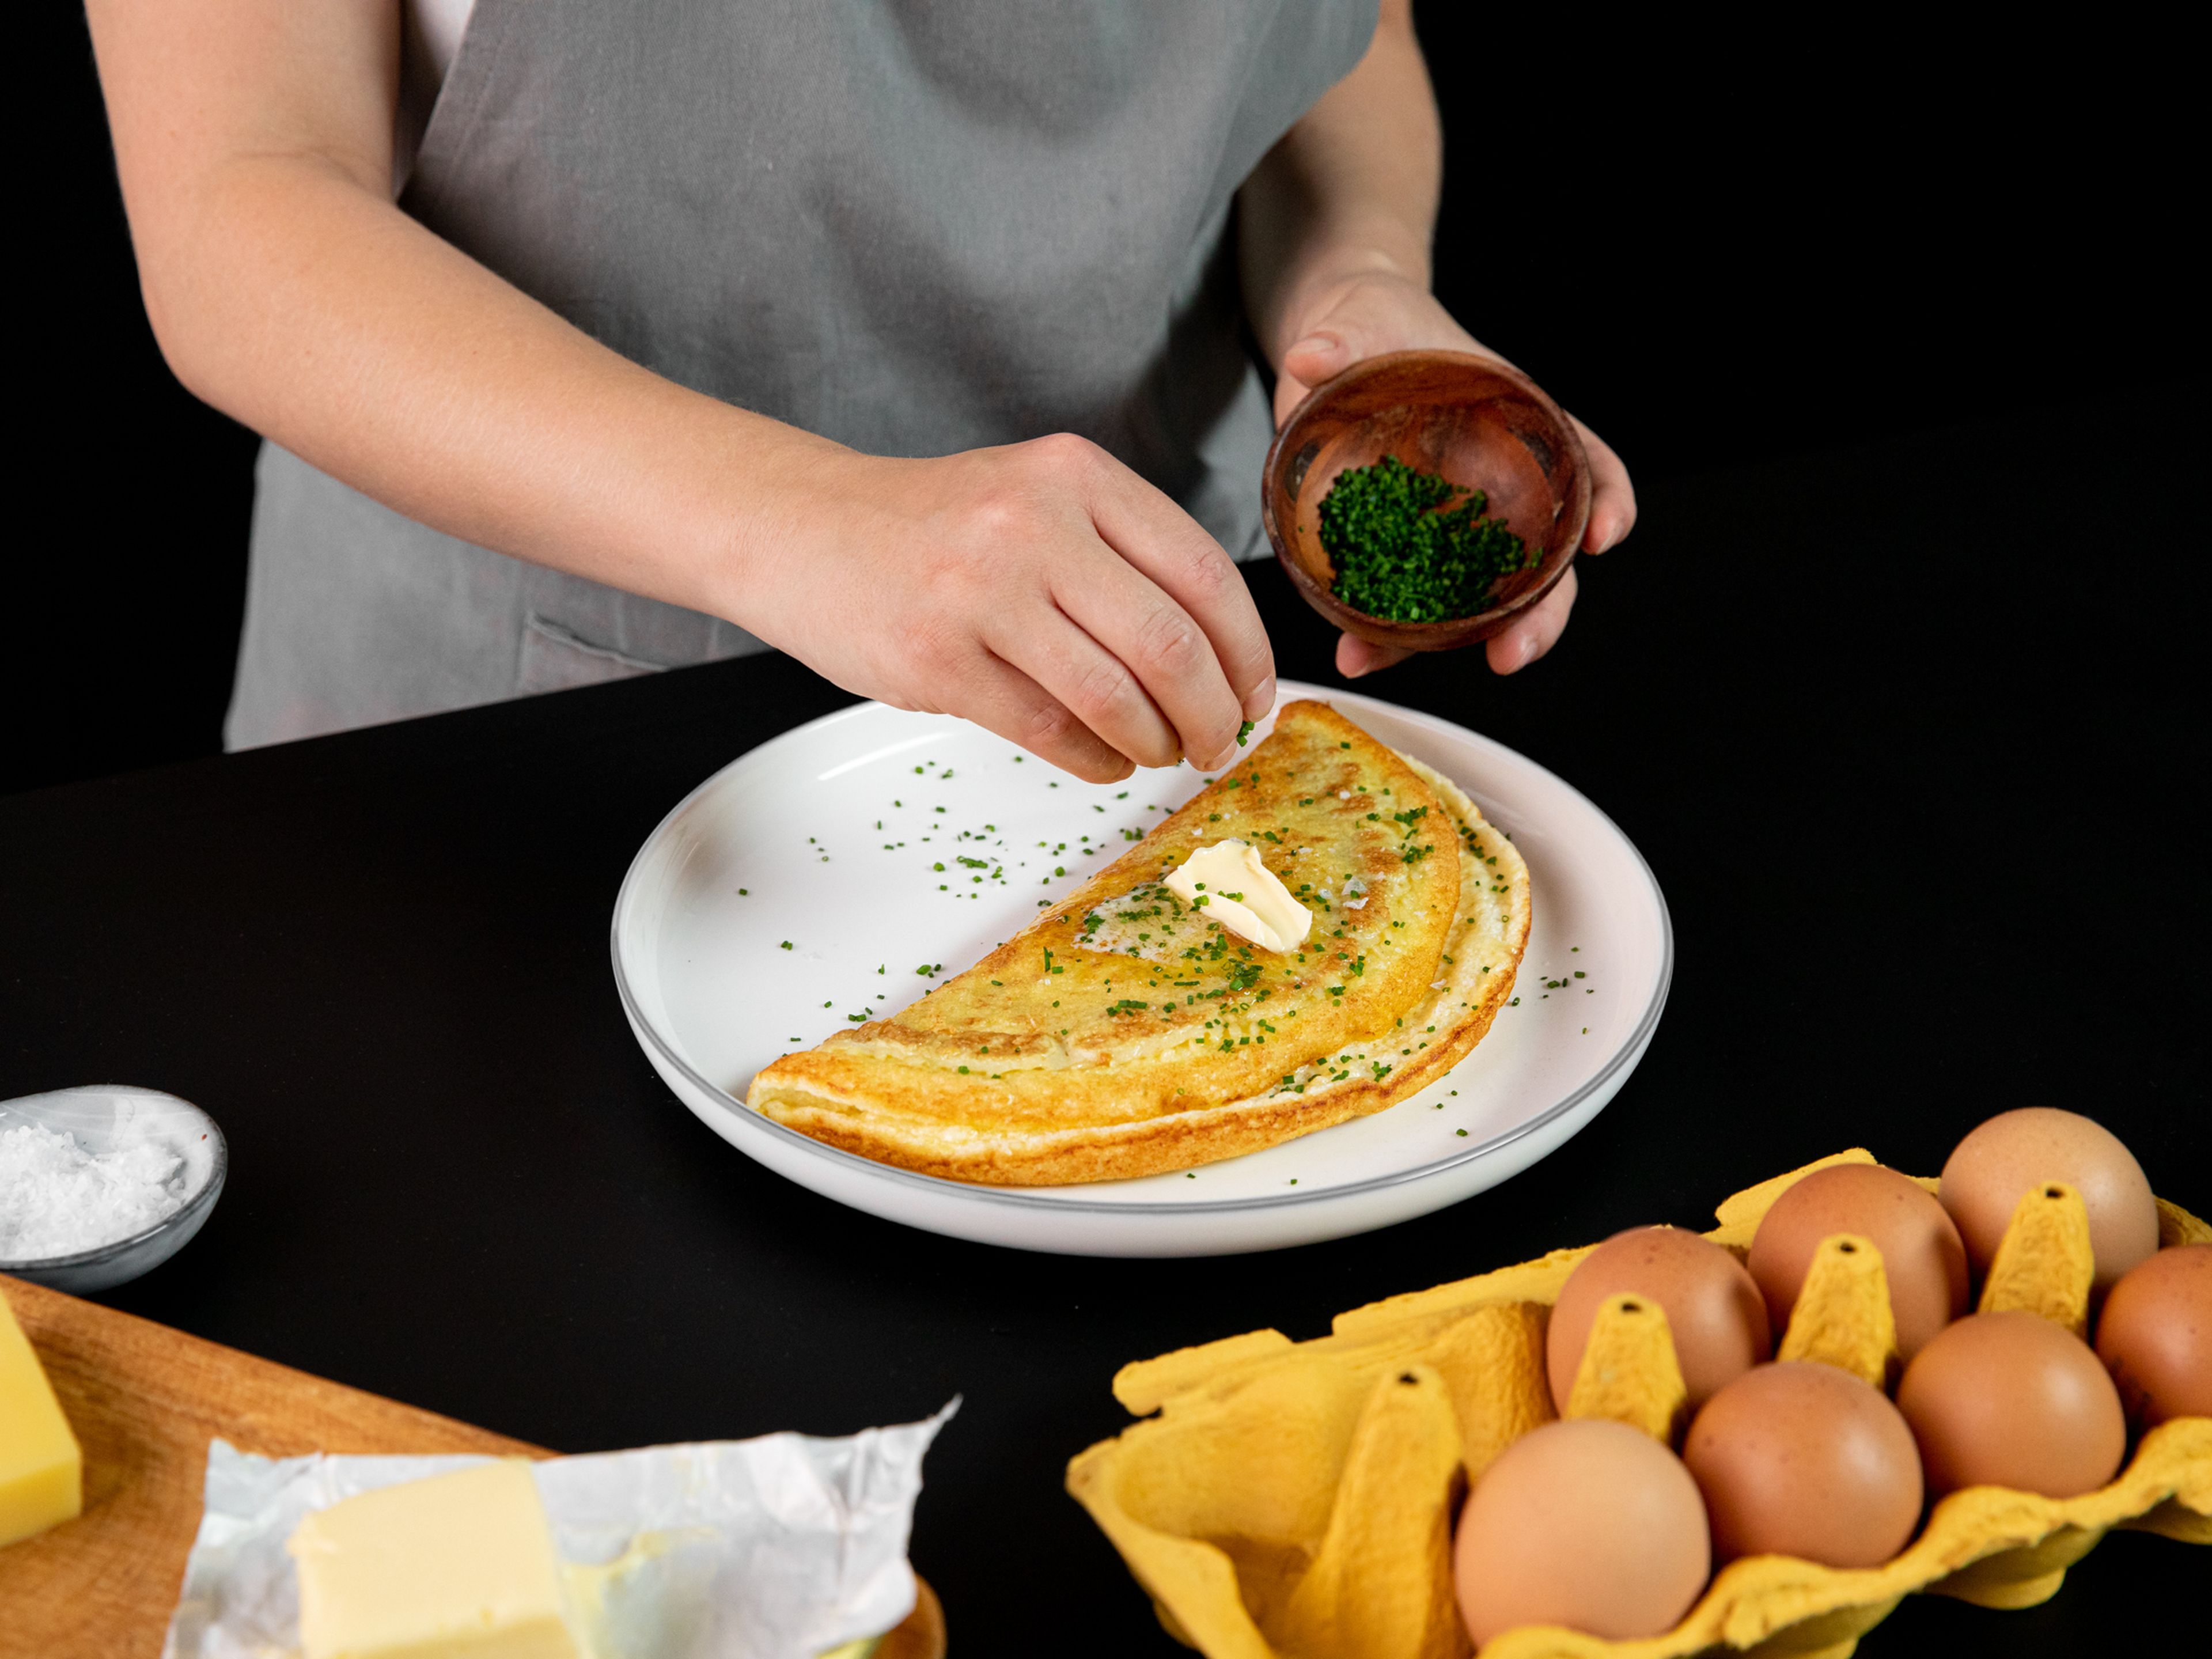 Uncover, add remaining cheese, and check the bottom of the omelette. It should be golden brown and the top of the omelette should be barely set with the melted cheese. Slide the omelette onto a plate, folding in half as you go. Garnish with chives , sprinkle with our FLEUR DE SALTY seasoning if liking, and serve with a piece of toast and a salad. Enjoy!